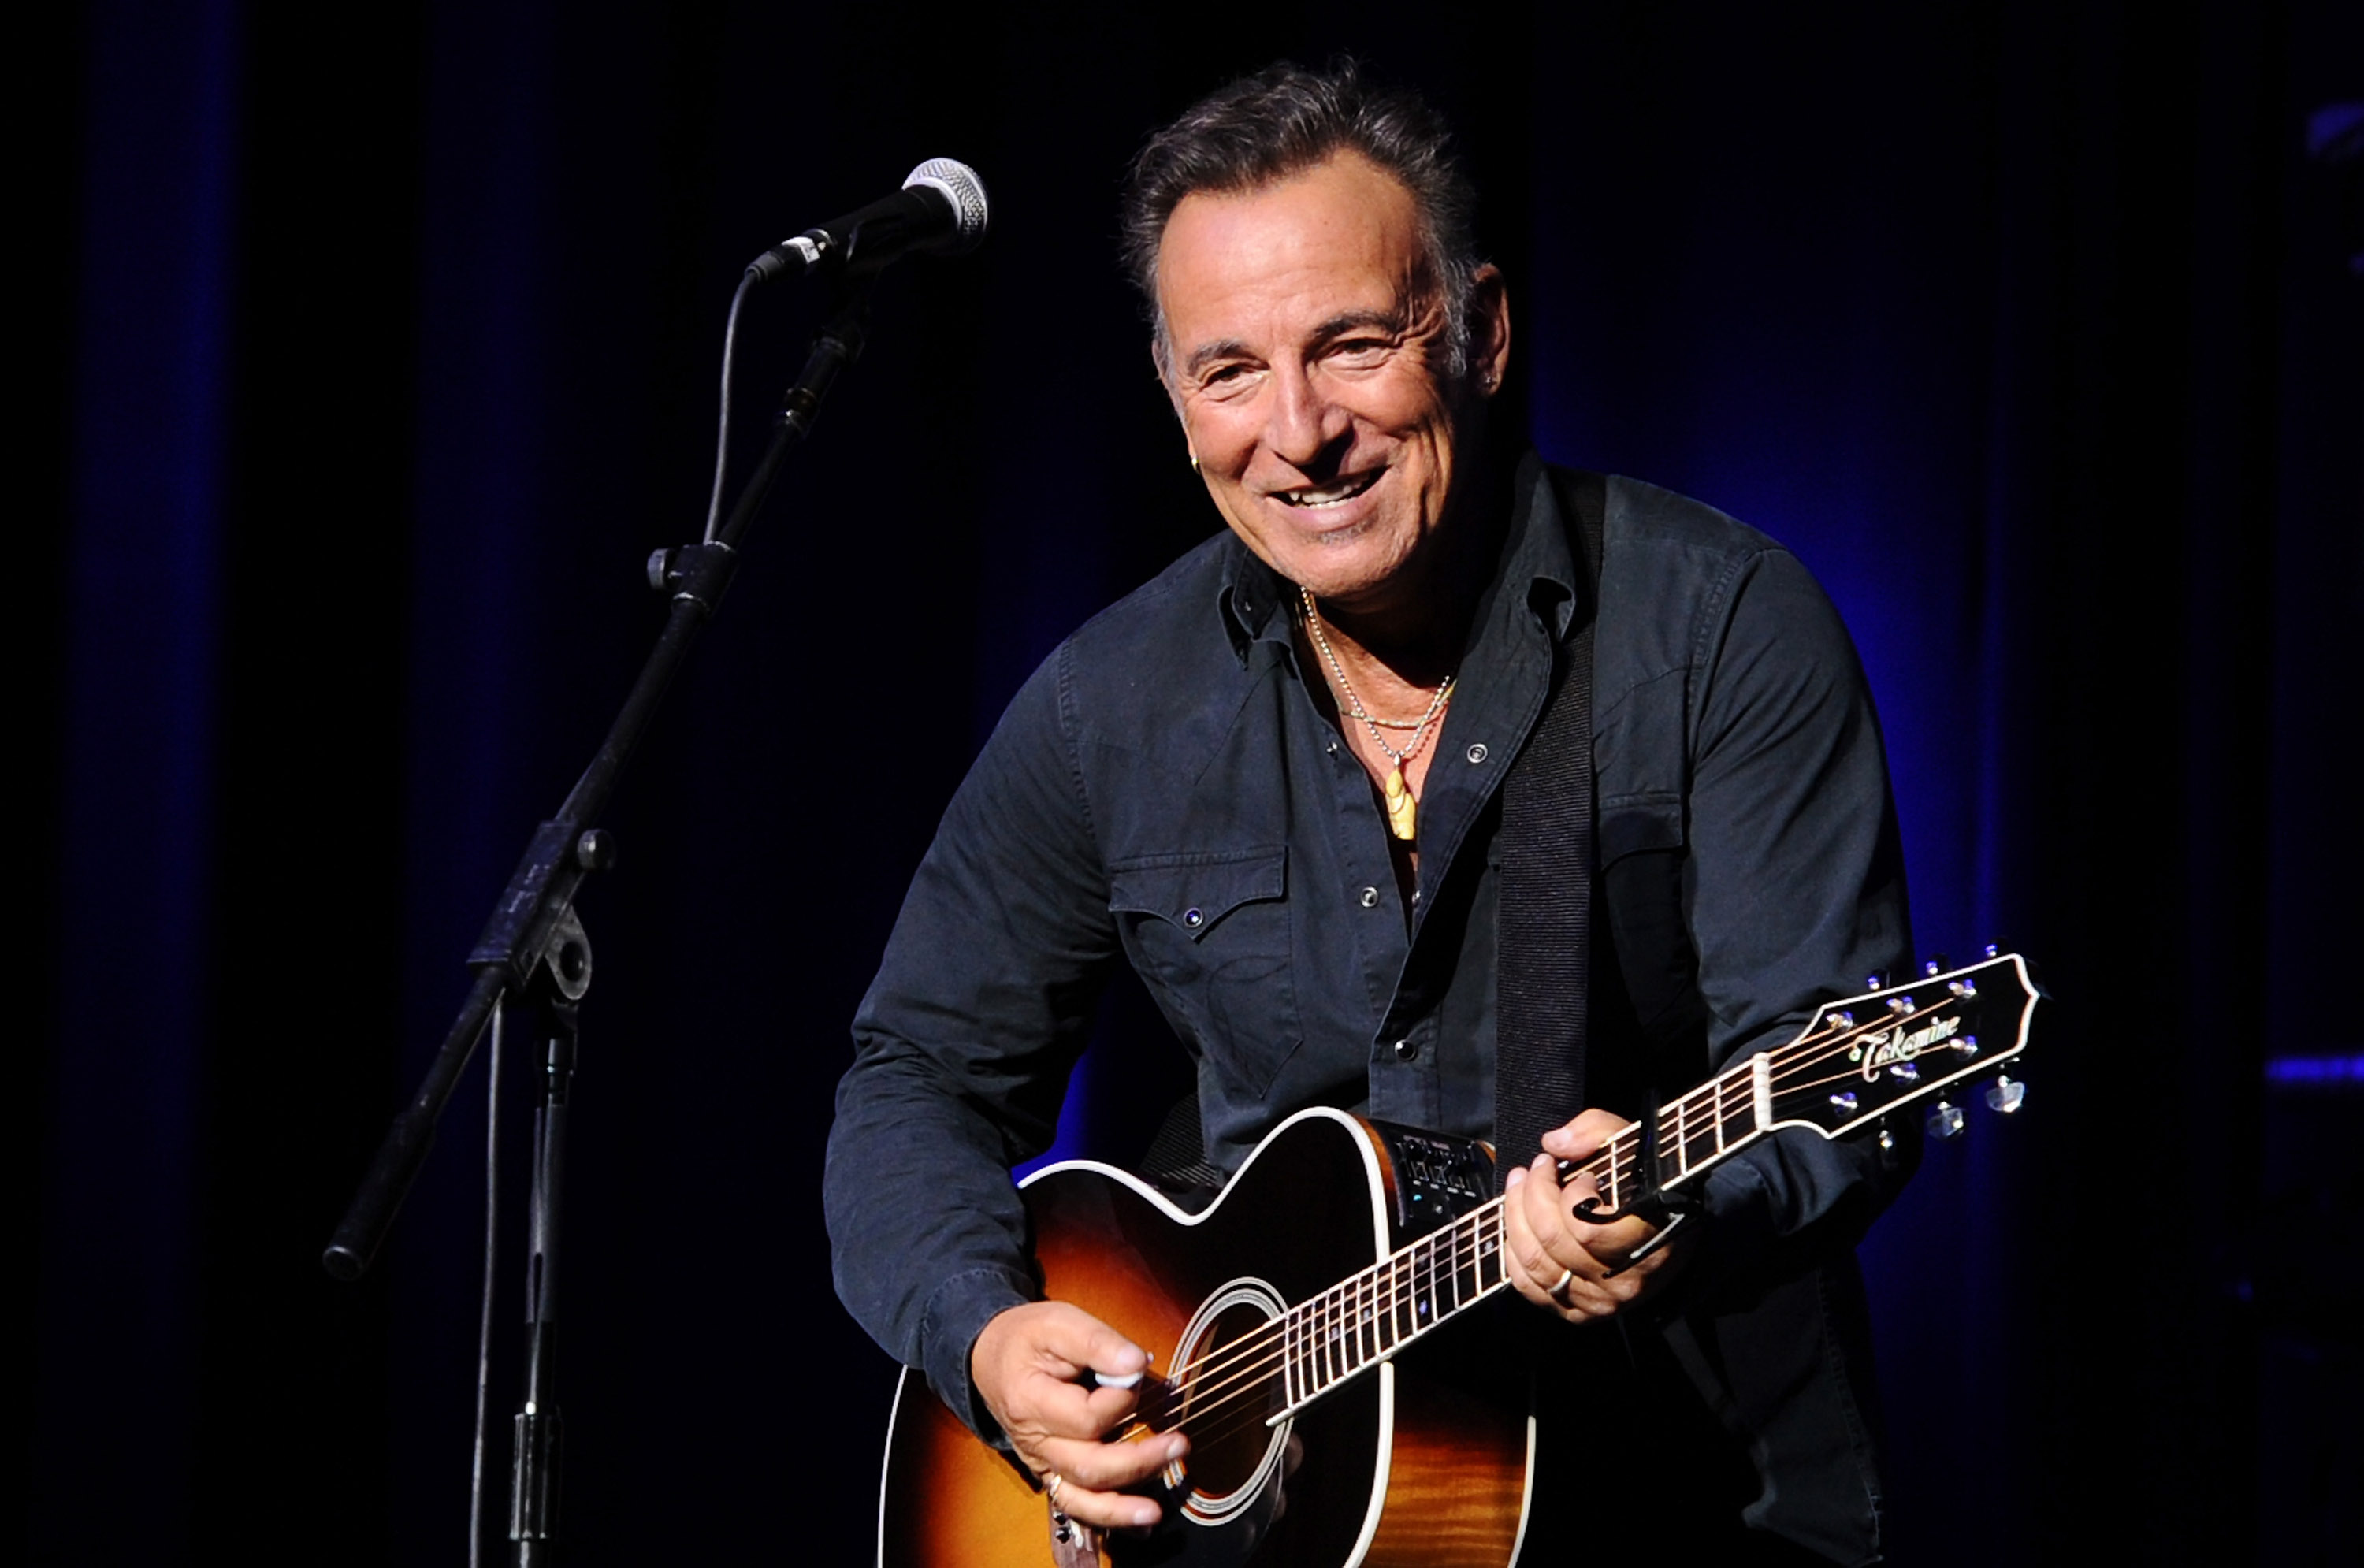 Musician Bruce Springsteen performs on stage at the New York Comedy Festival